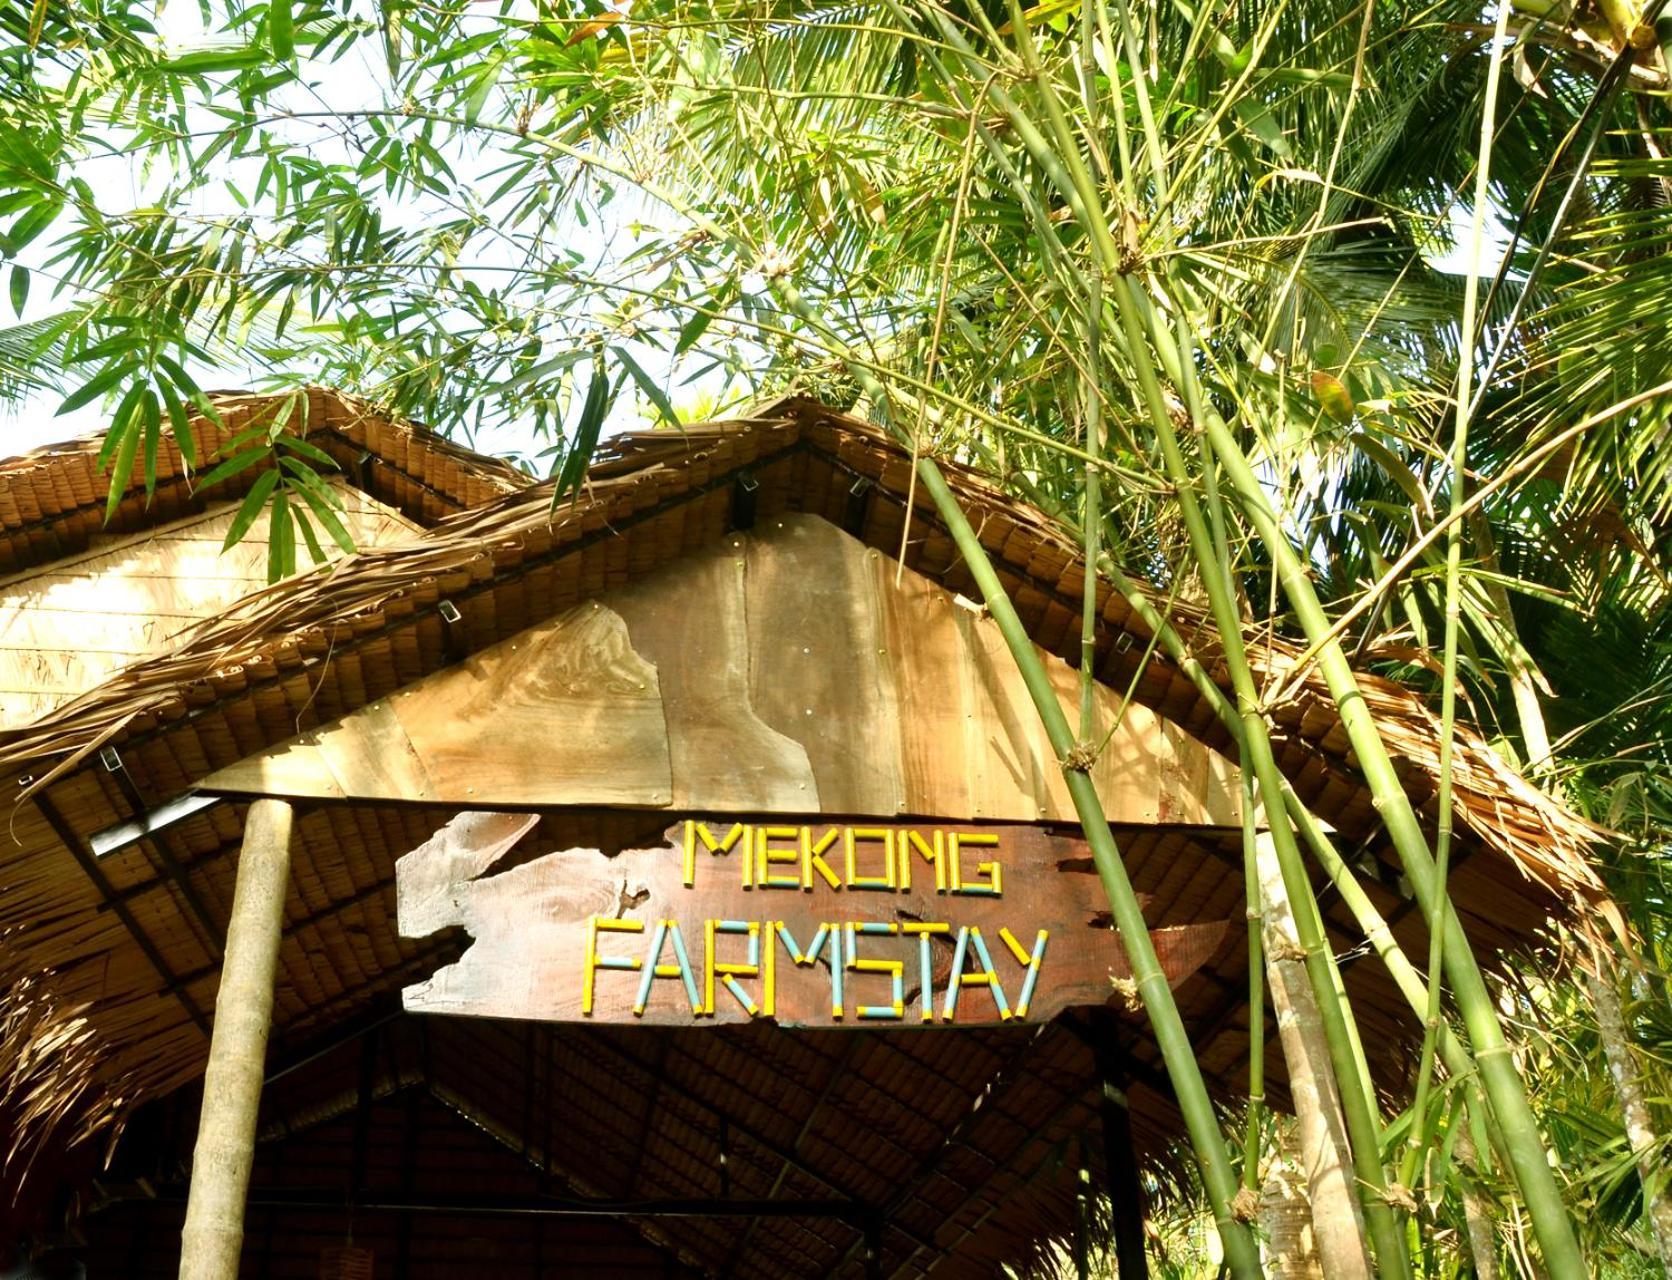 Mekong Farmstay Cantho - C.R Floating Market Cần Thơ Exterior foto